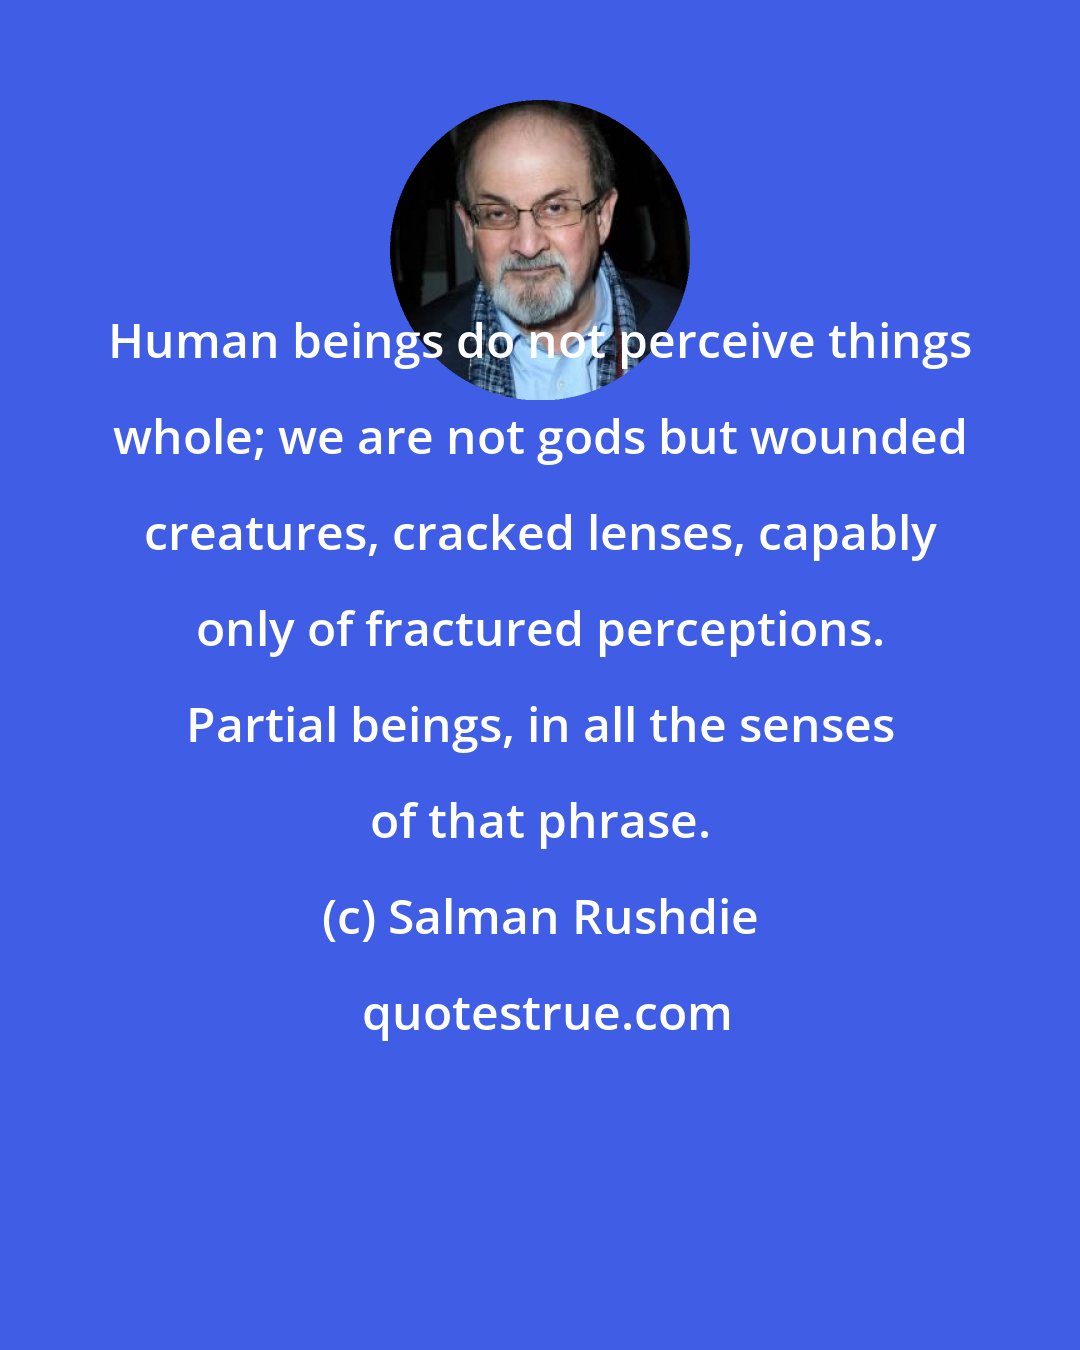 Salman Rushdie: Human beings do not perceive things whole; we are not gods but wounded creatures, cracked lenses, capably only of fractured perceptions. Partial beings, in all the senses of that phrase.